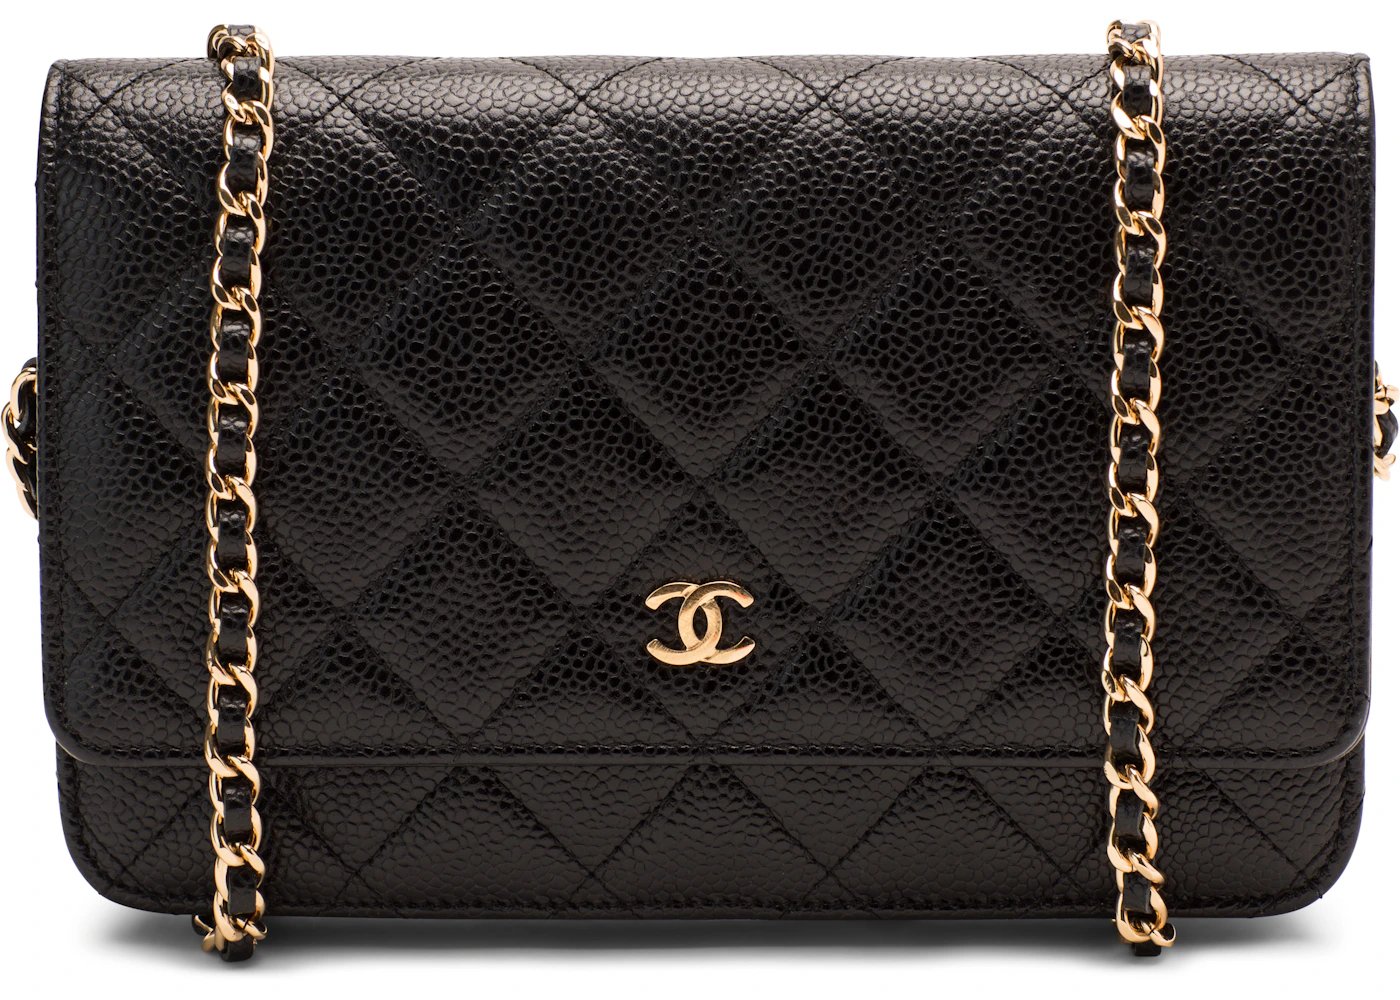 chanel wallet pouch